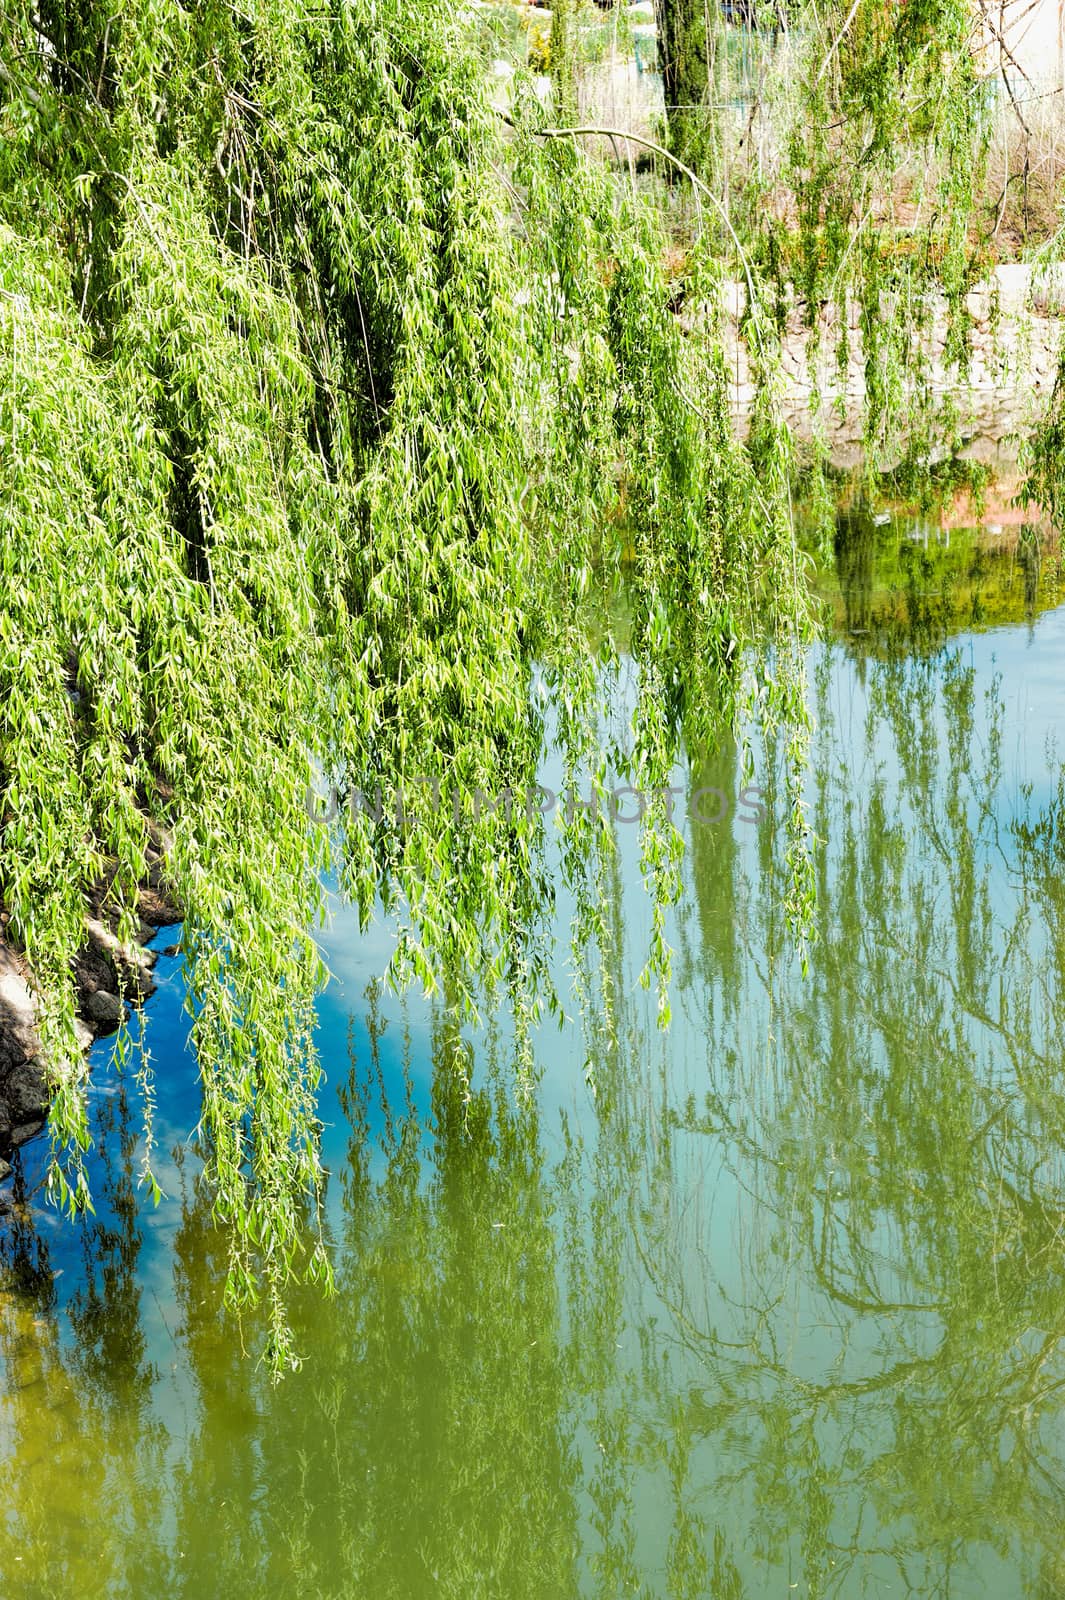 Willow over water by ben44